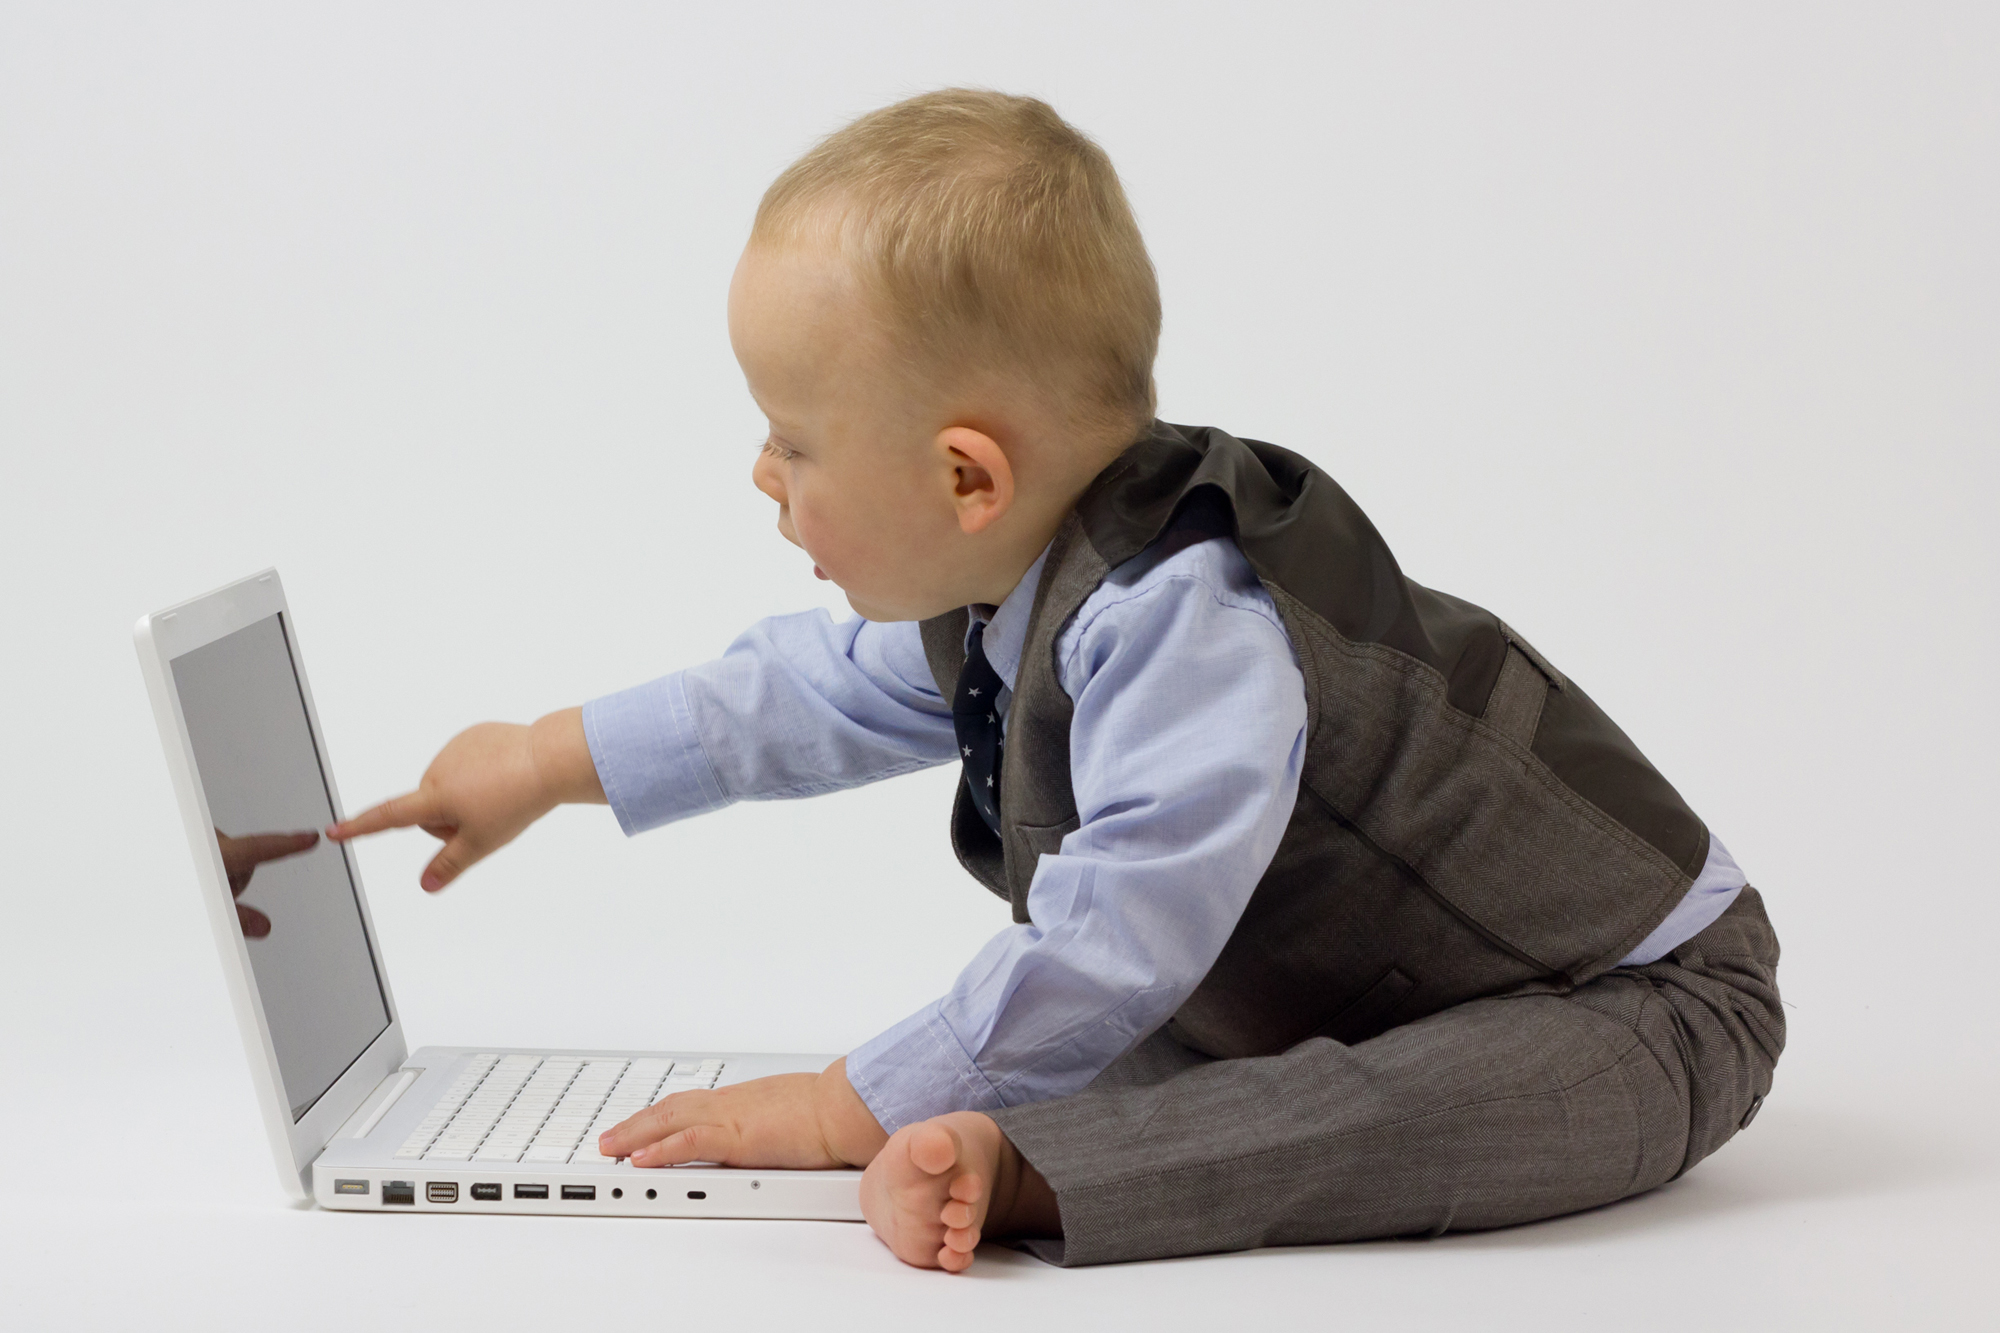 A white baby in a business suit, leans in and points at a laptop screen.